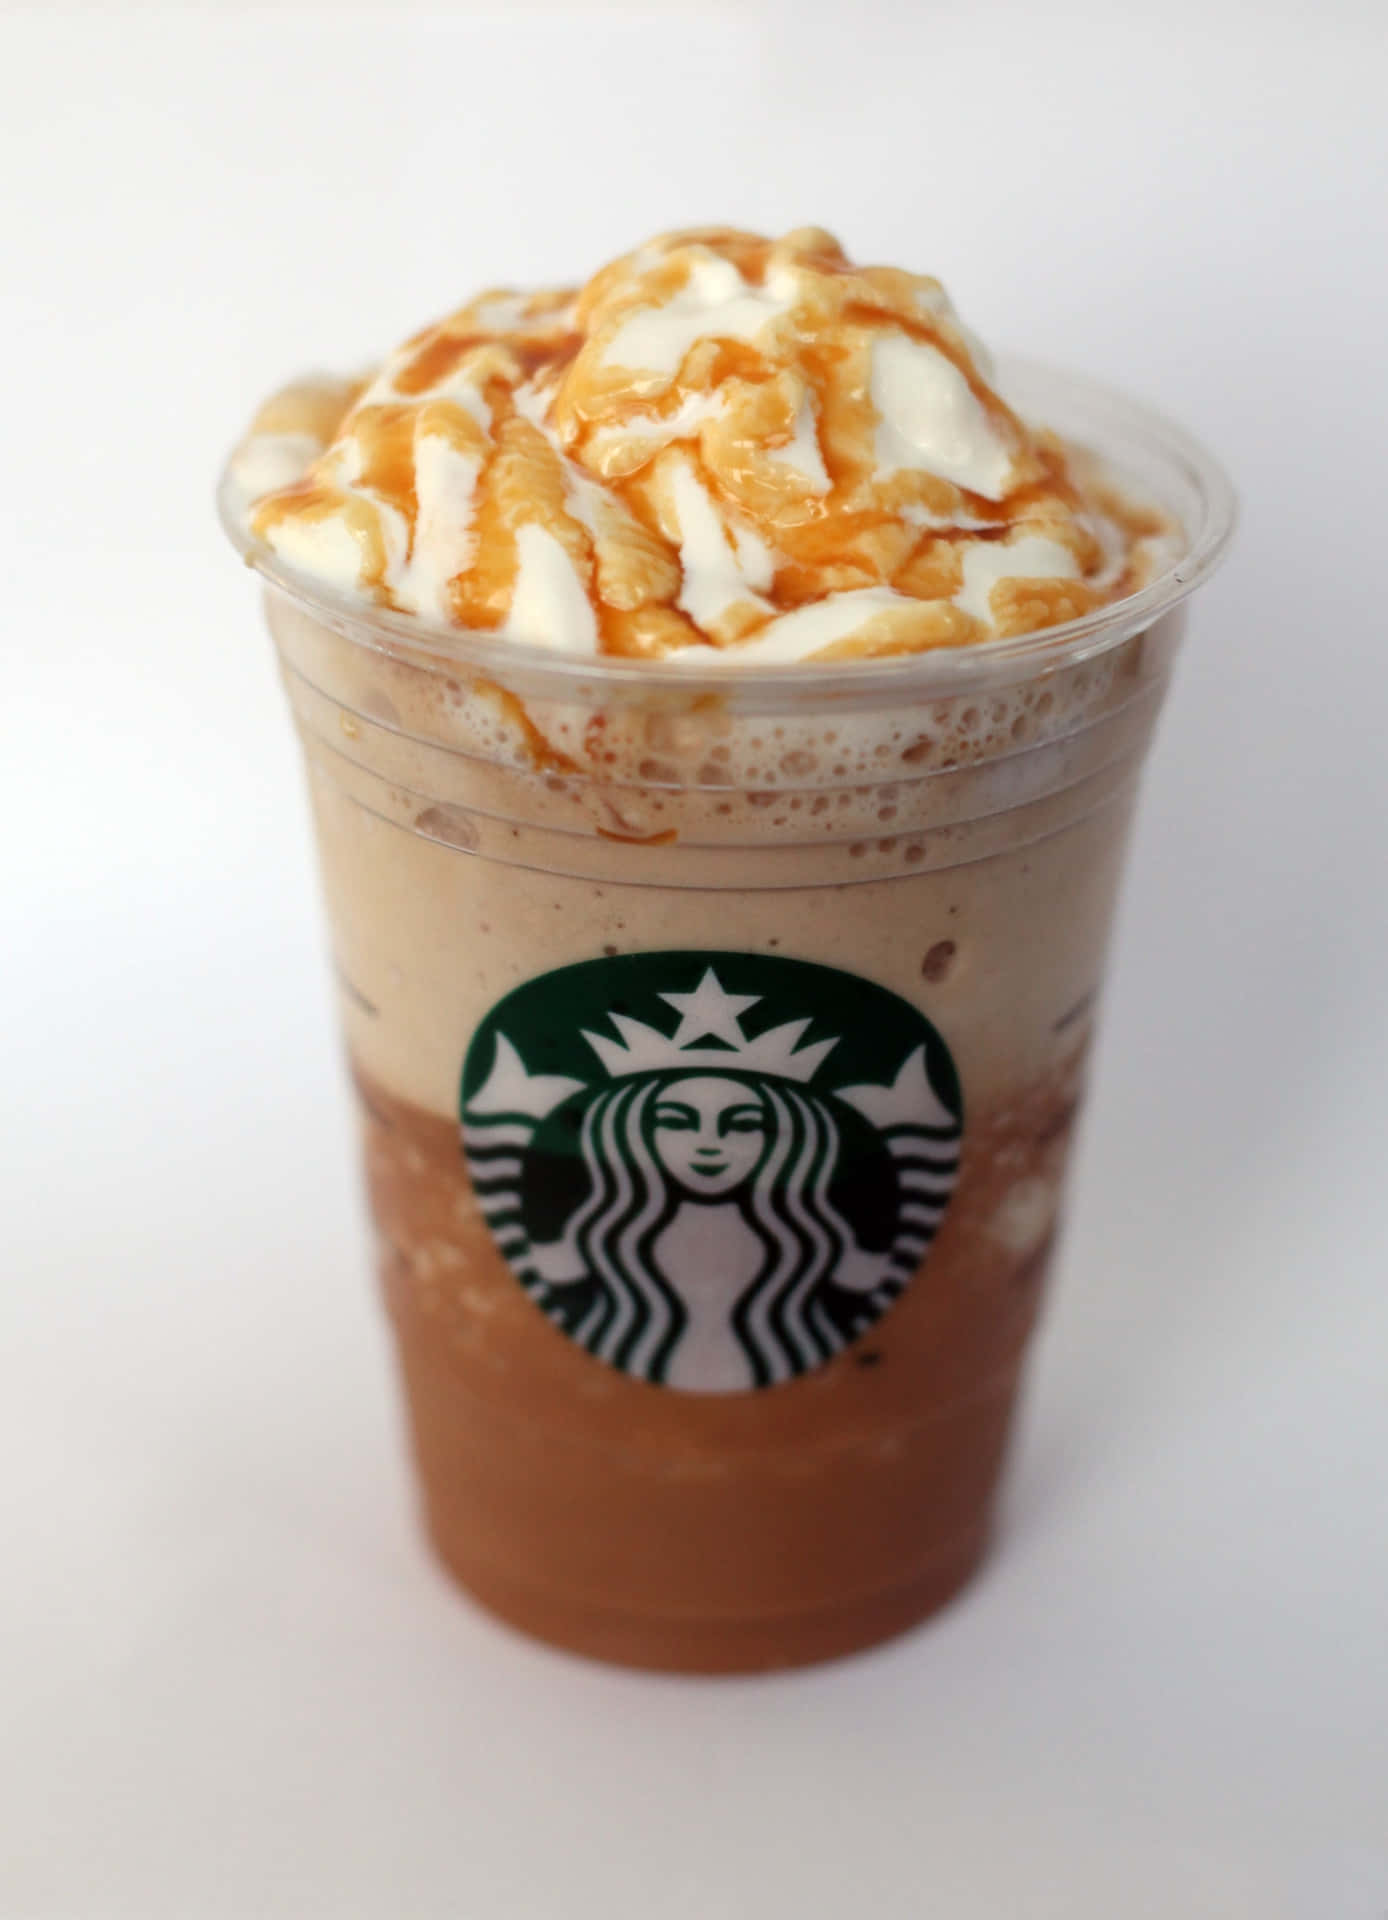 Sip something special with Starbucks